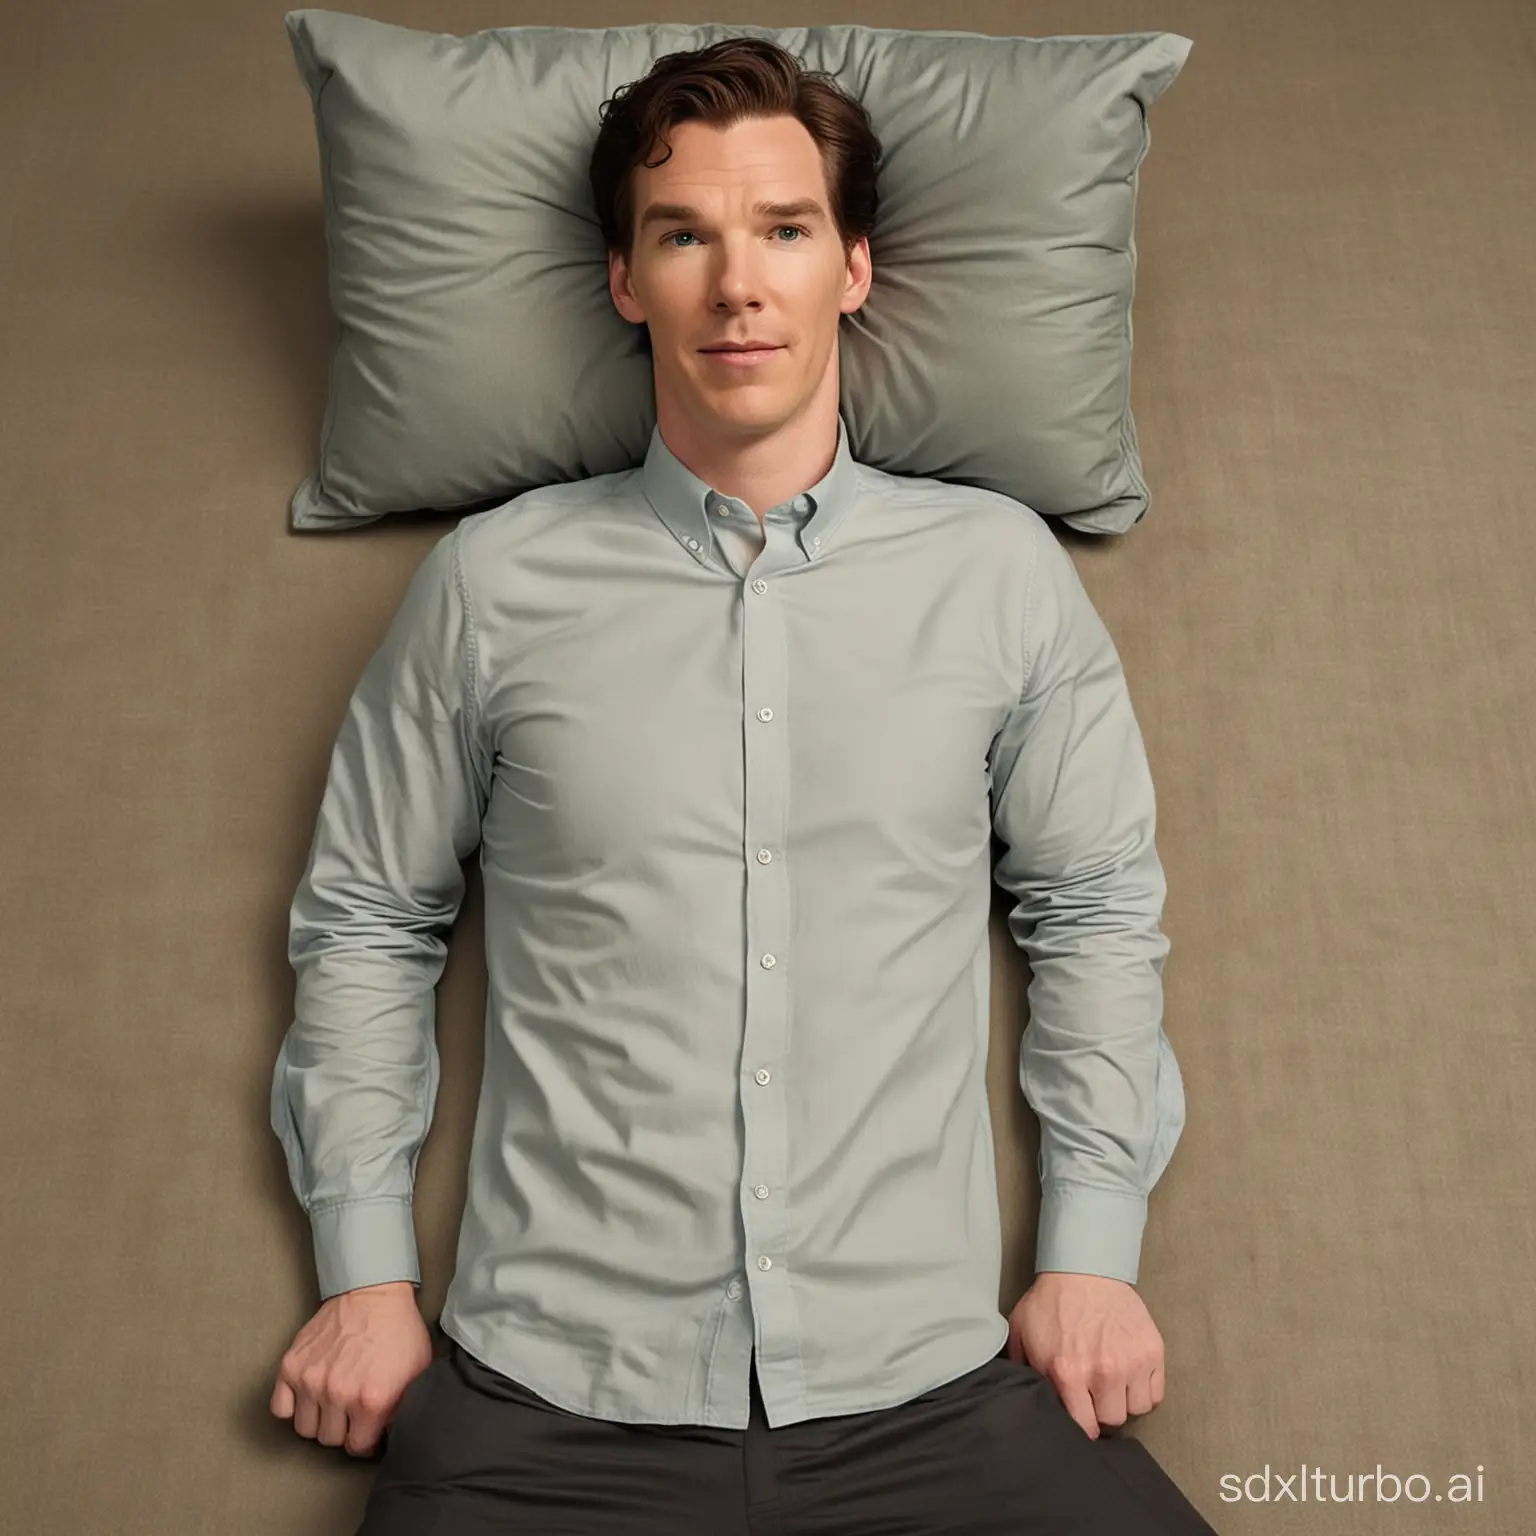 Benedict-Cumberbatch-Relaxing-on-Bed-in-Full-Body-Shot